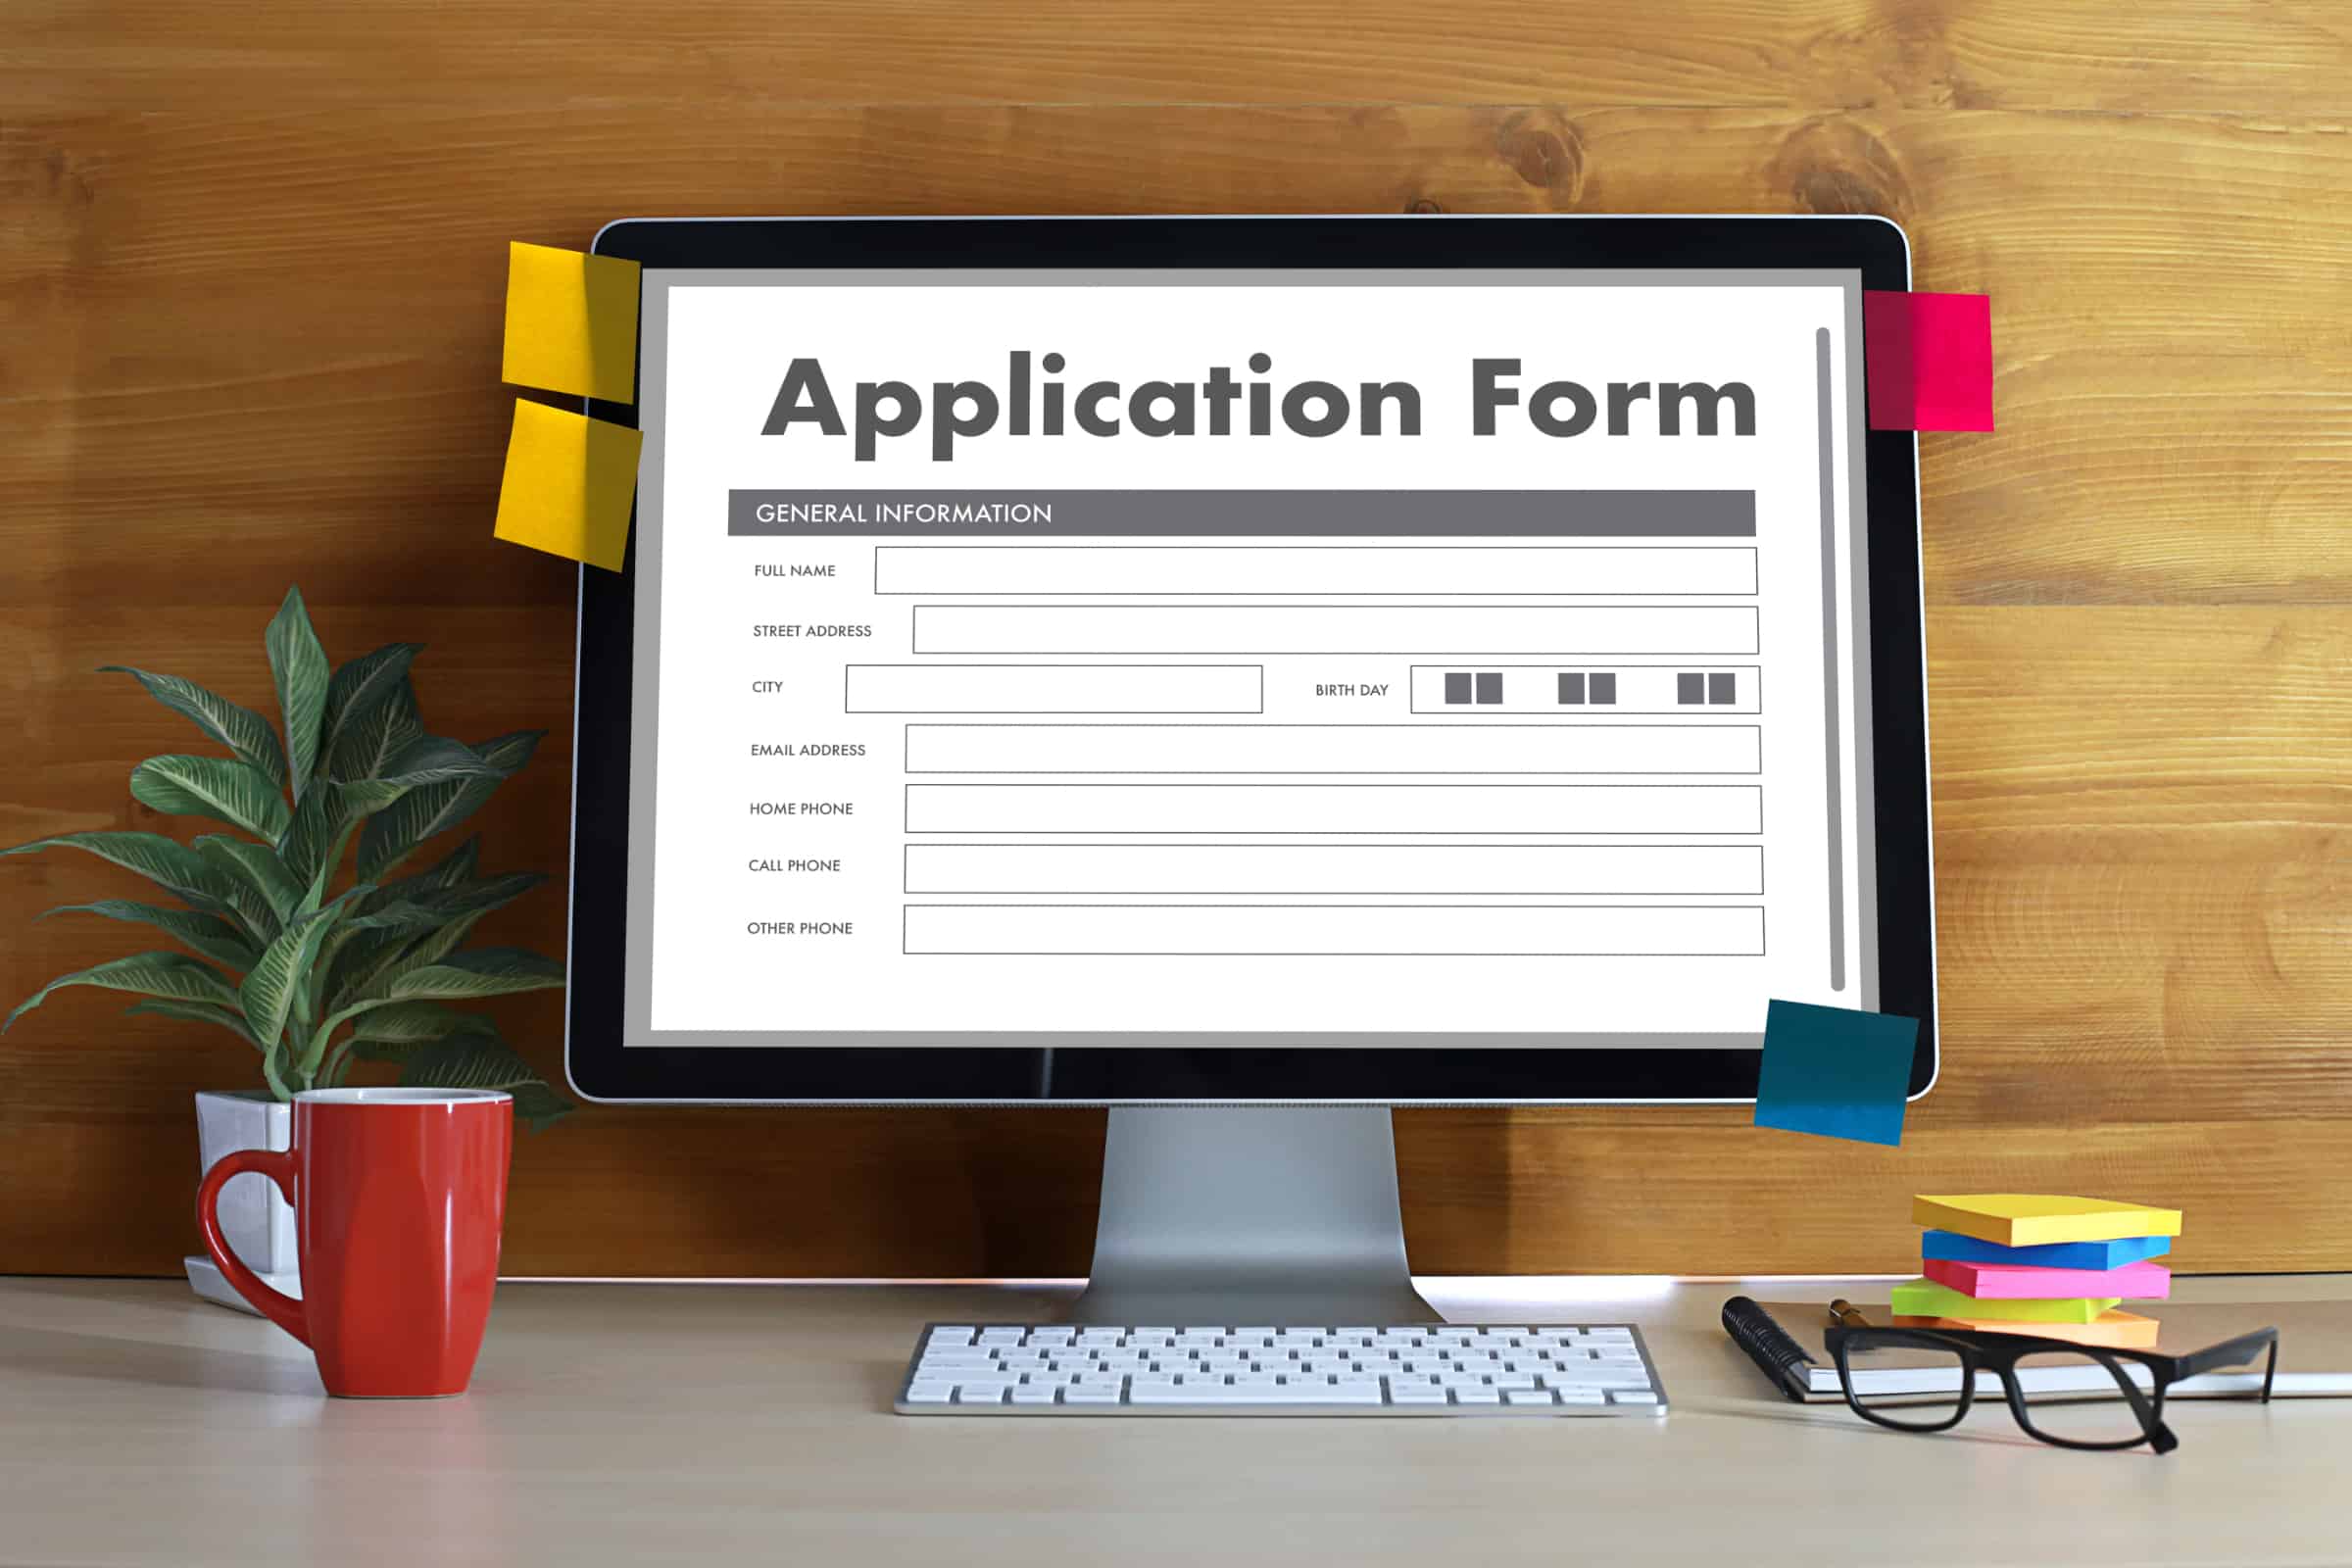 Online application form as displayed on computer monitor